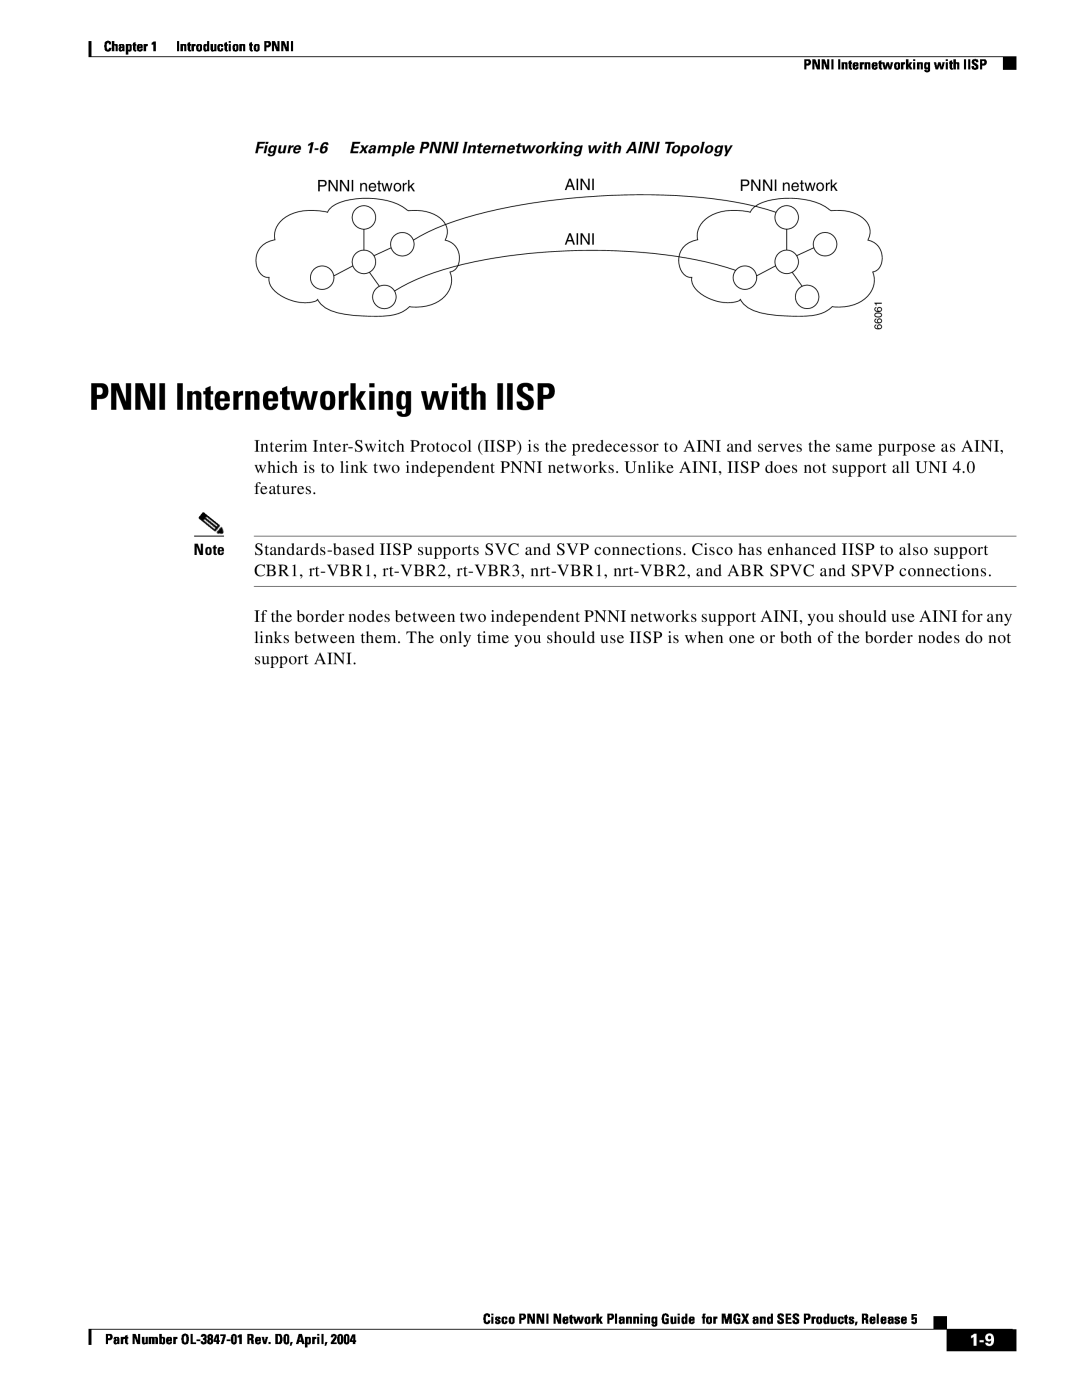 Cisco Systems Network Router manual PNNI Internetworking with IISP, 6 Example PNNI Internetworking with AINI Topology 